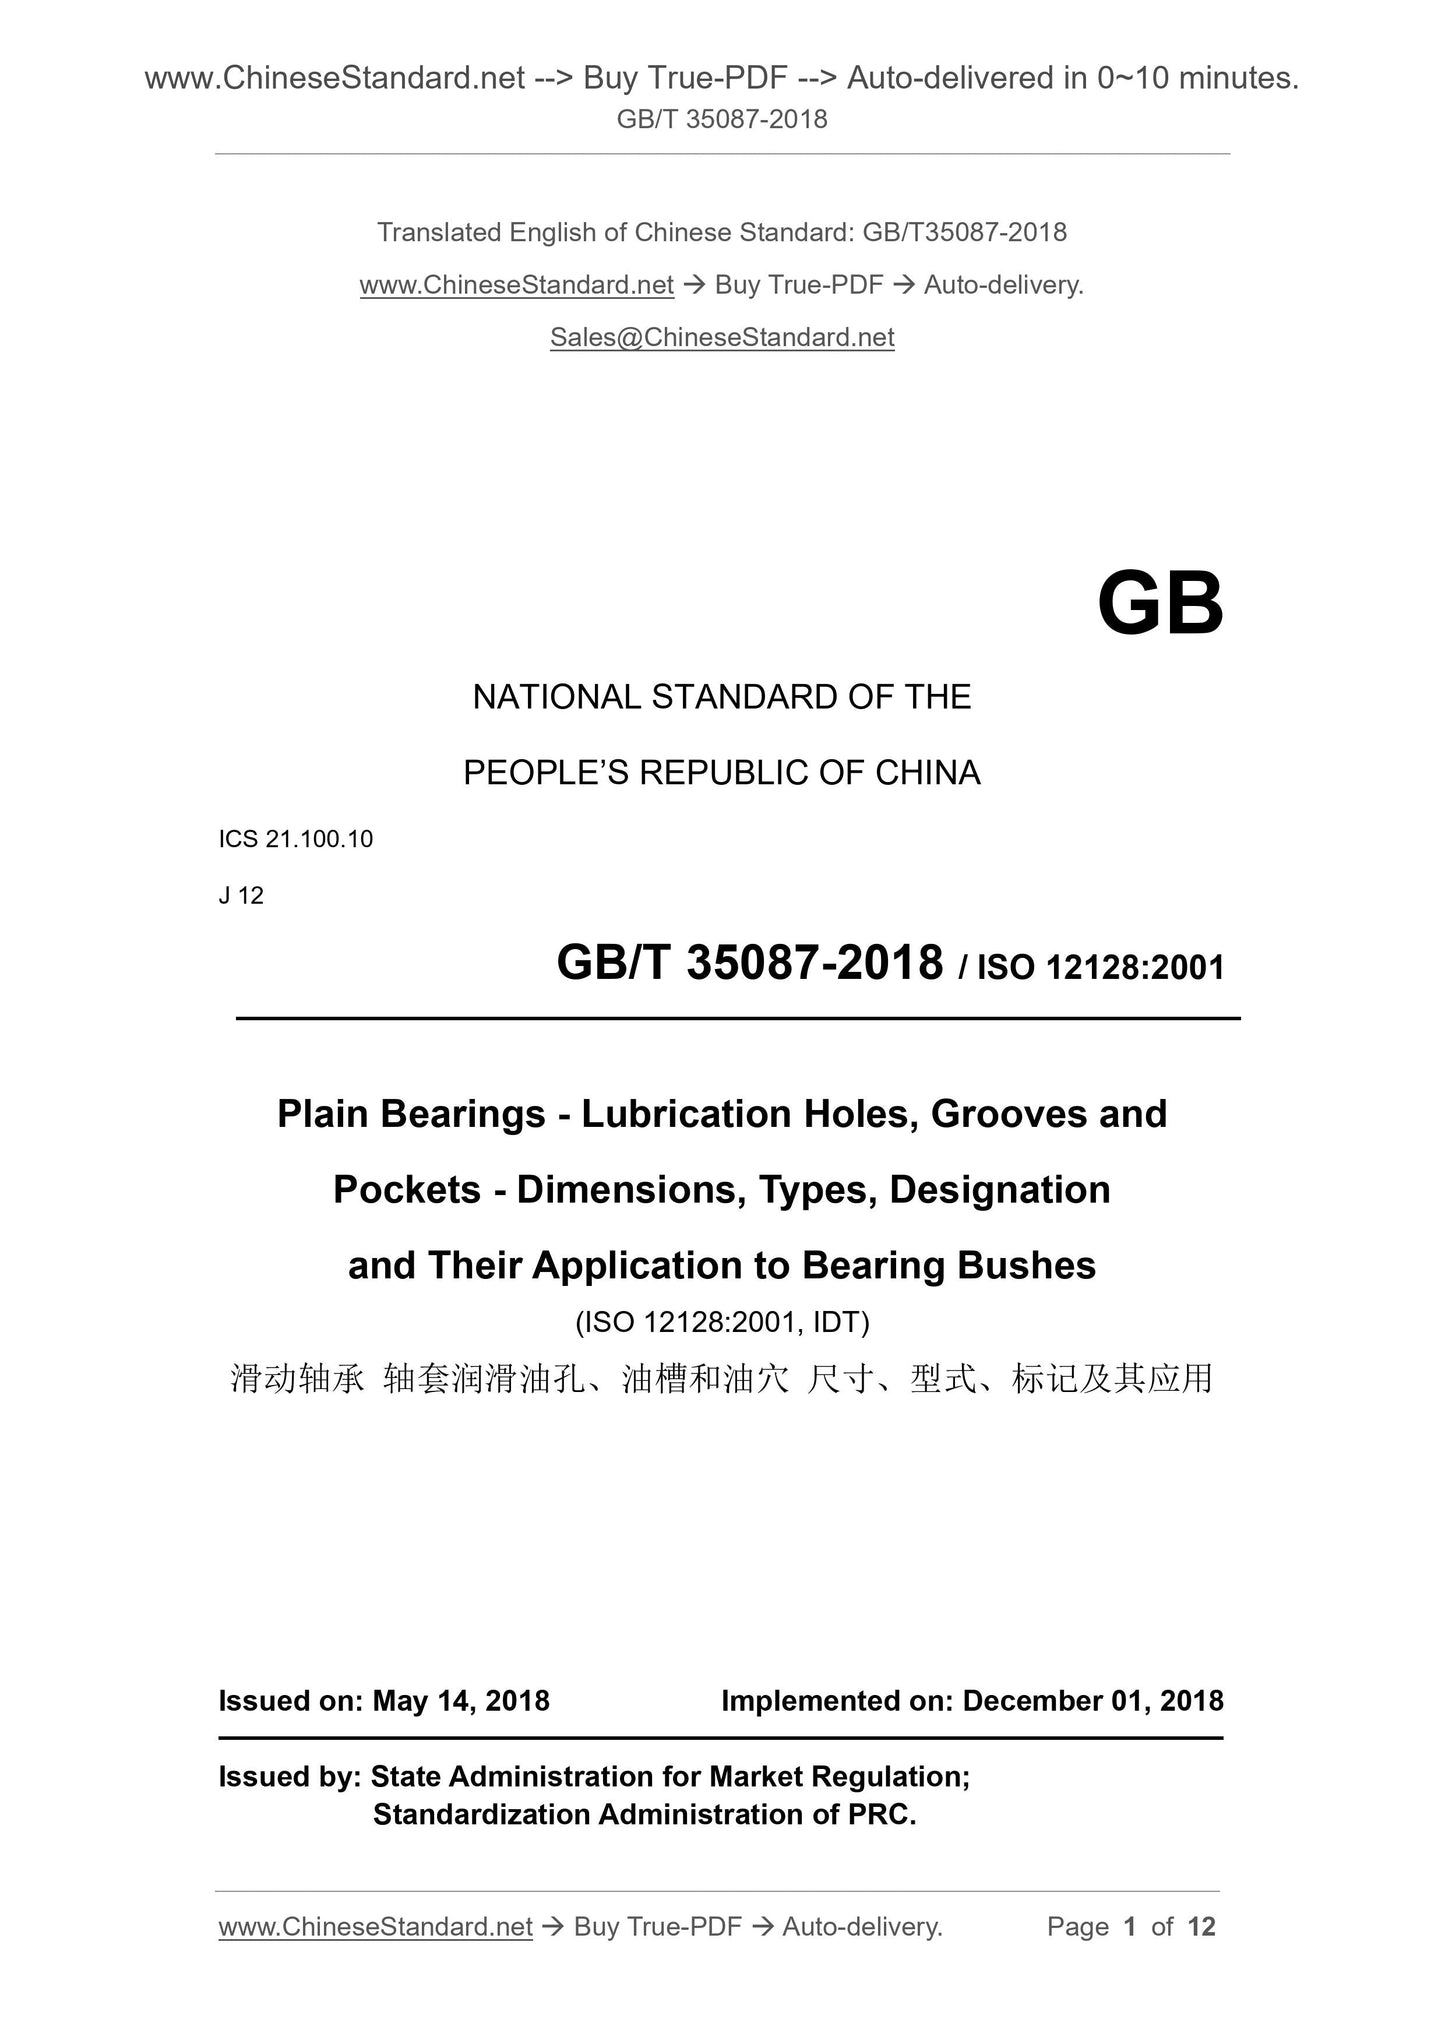 GB/T 35087-2018 Page 1